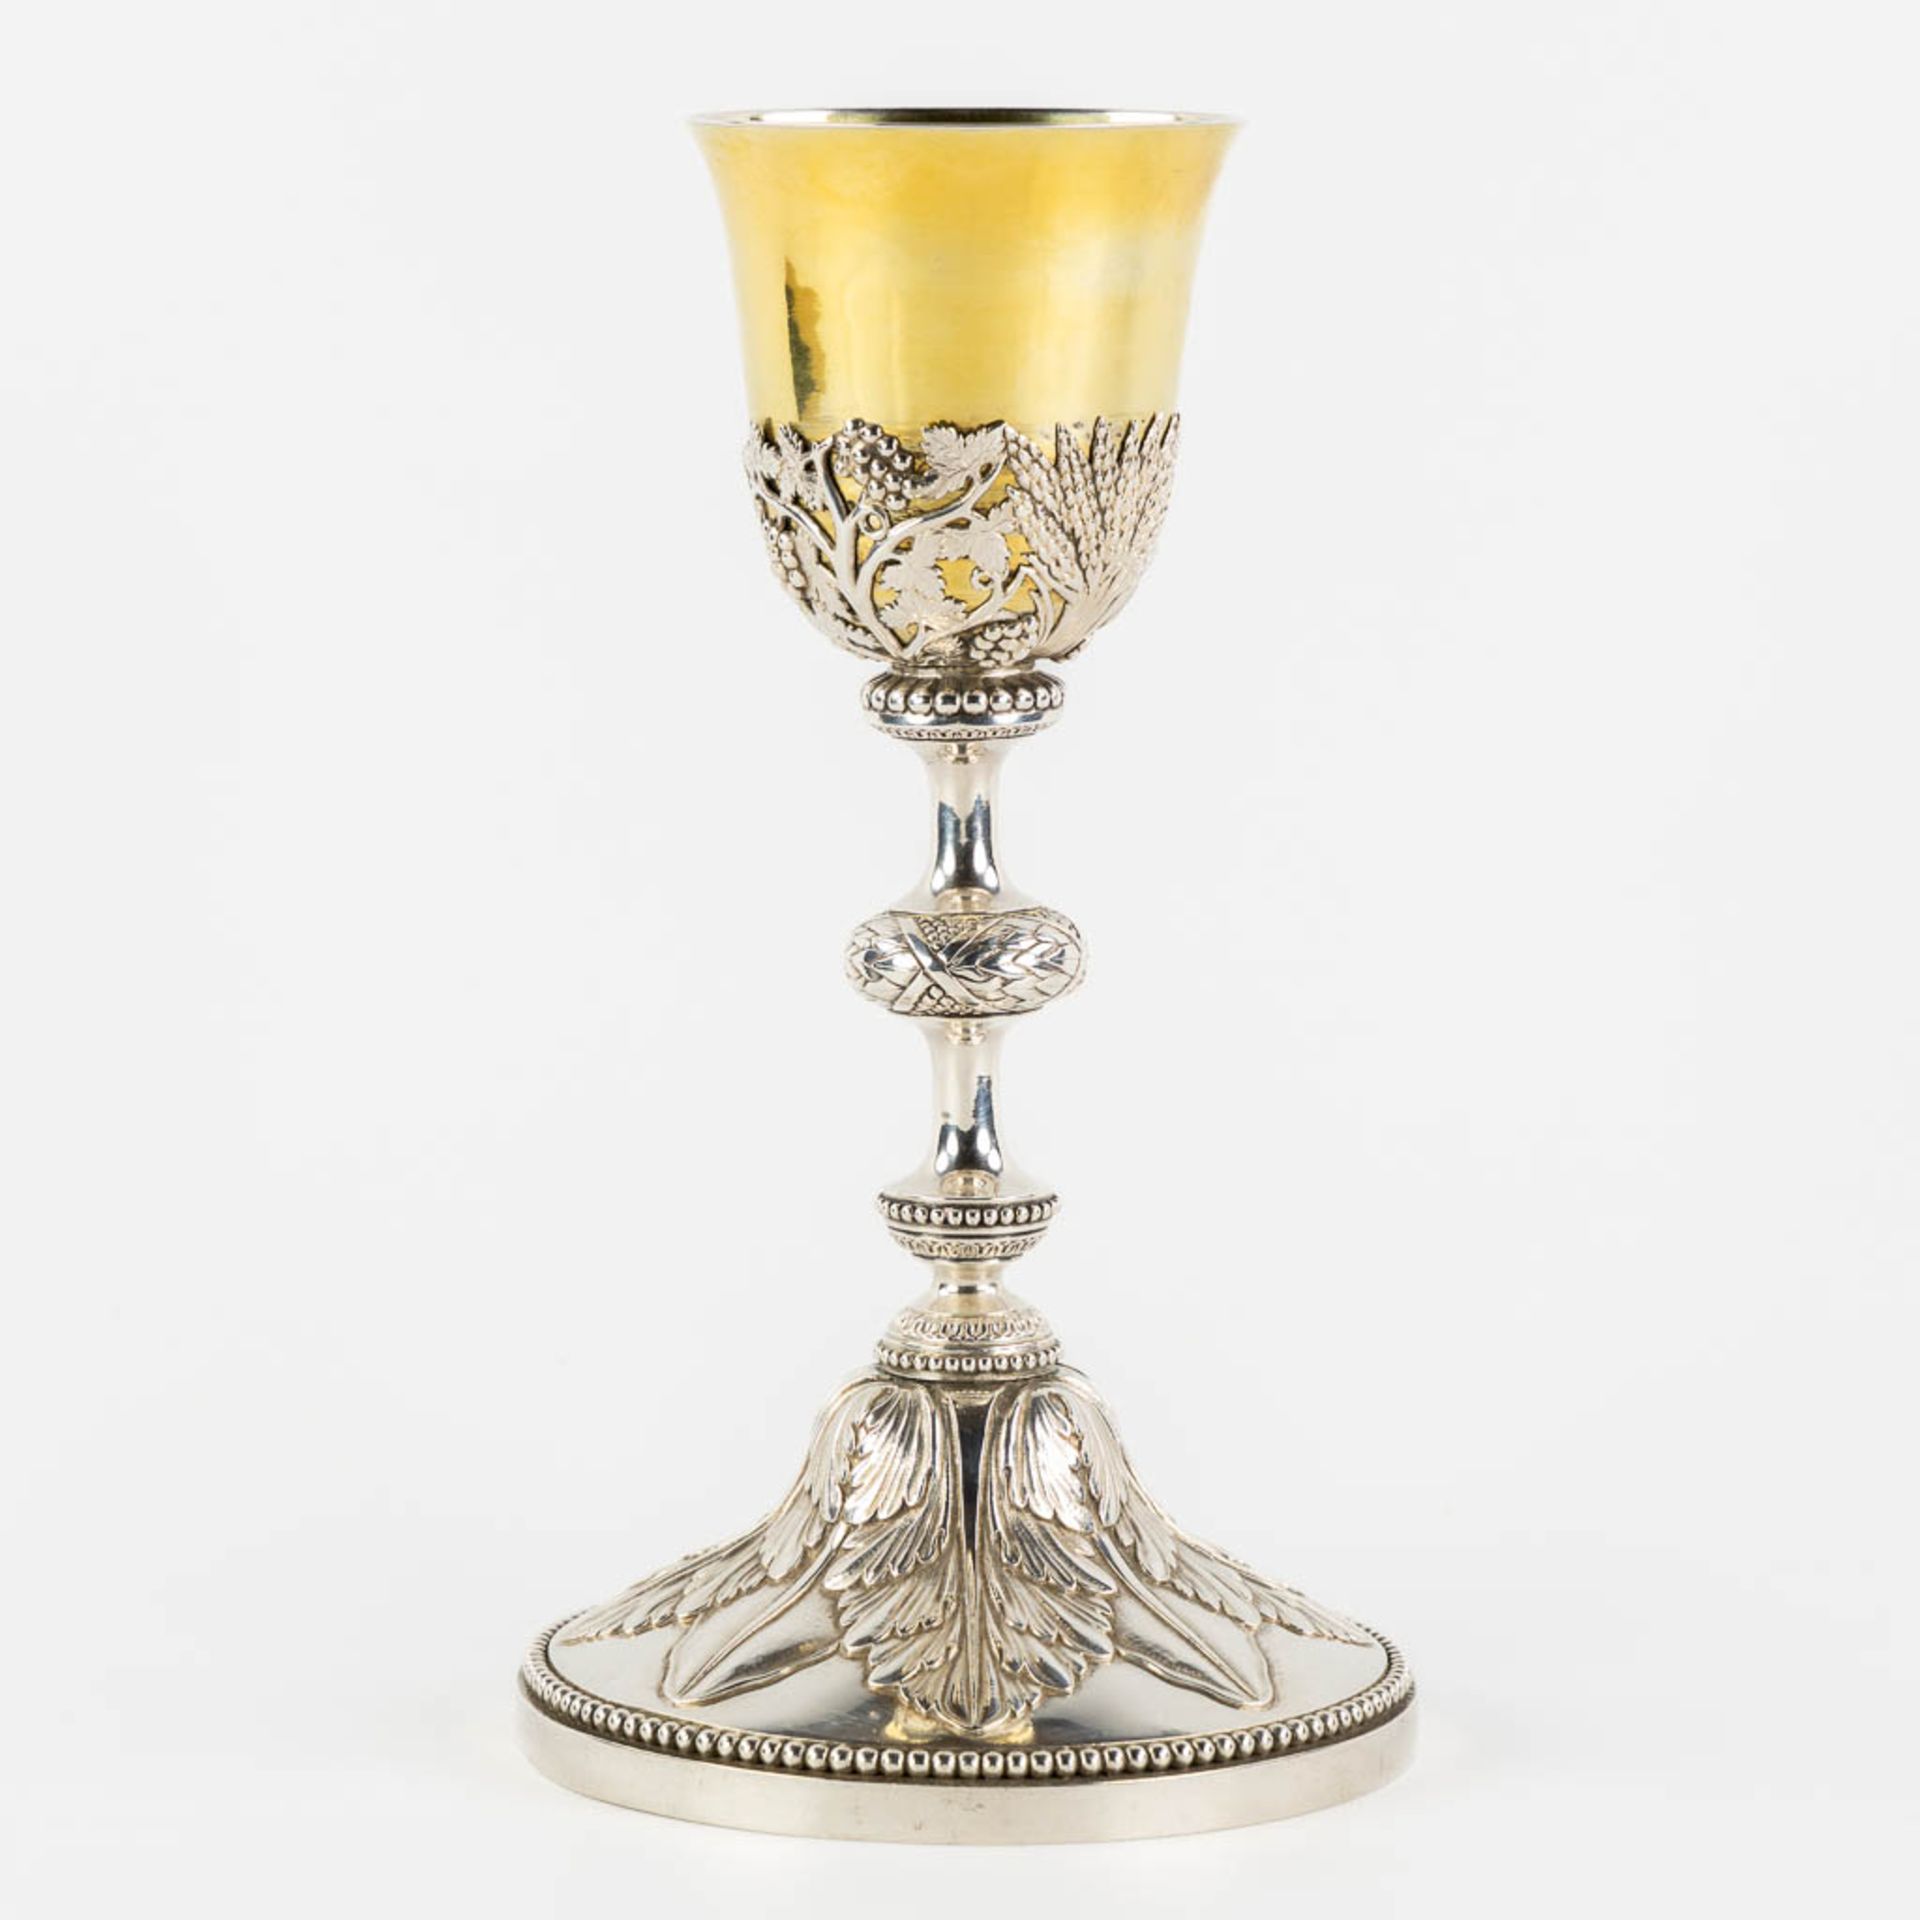 A chalice, silver-plated metal and gold-plated silver, Gothic Revival. 19th C. (H:27 x D:15 cm) - Image 5 of 9